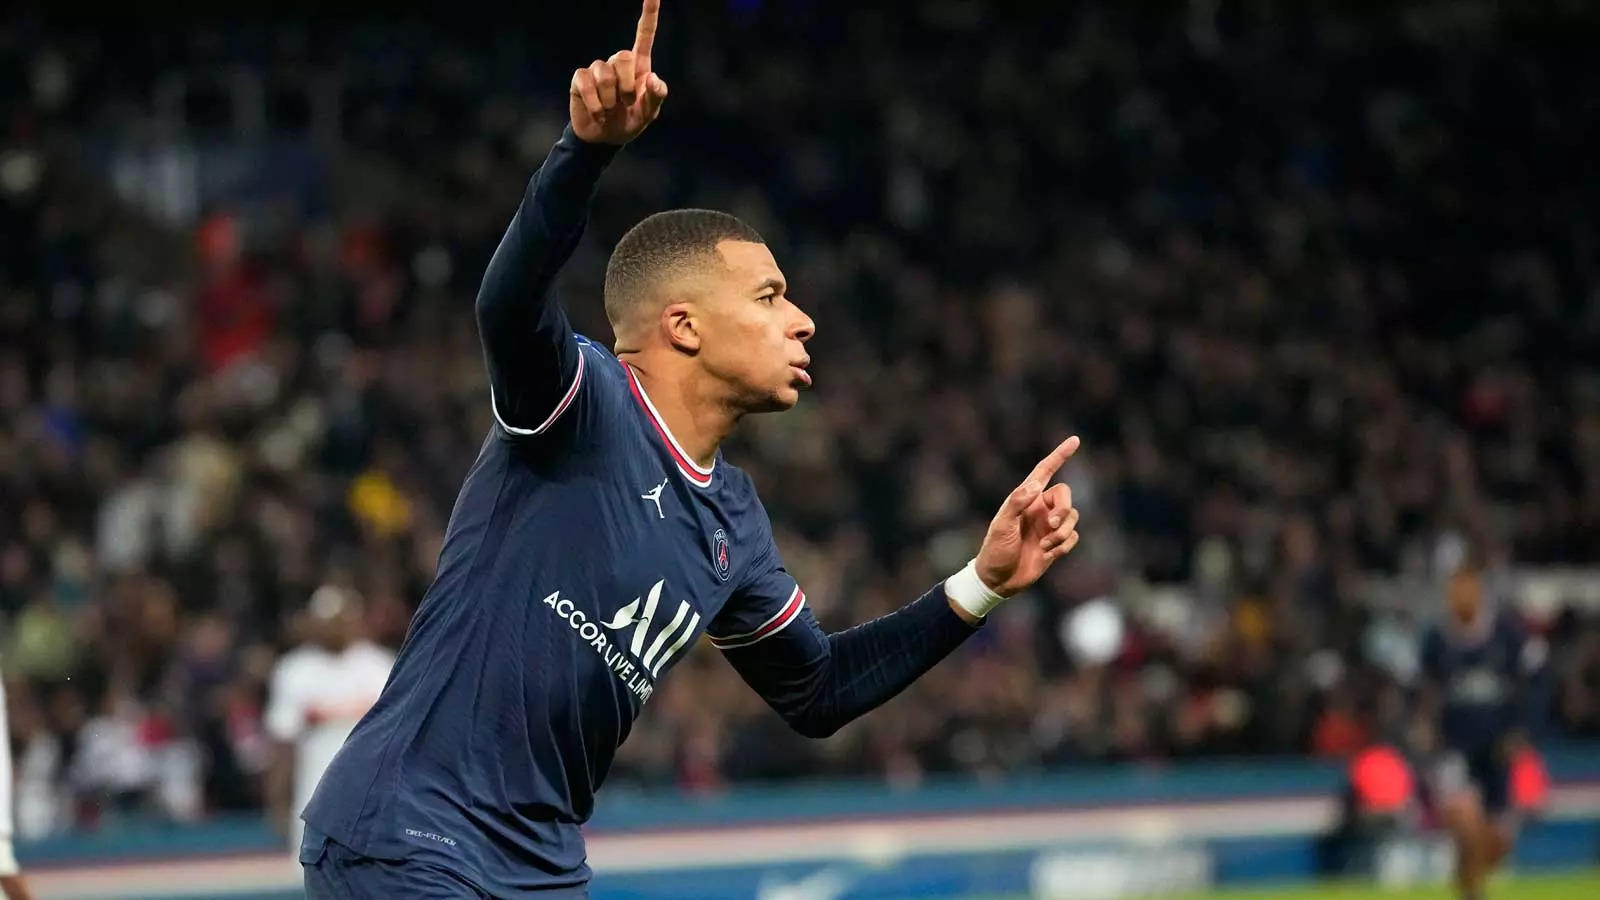 PSG take on Marseille in Ligue 1